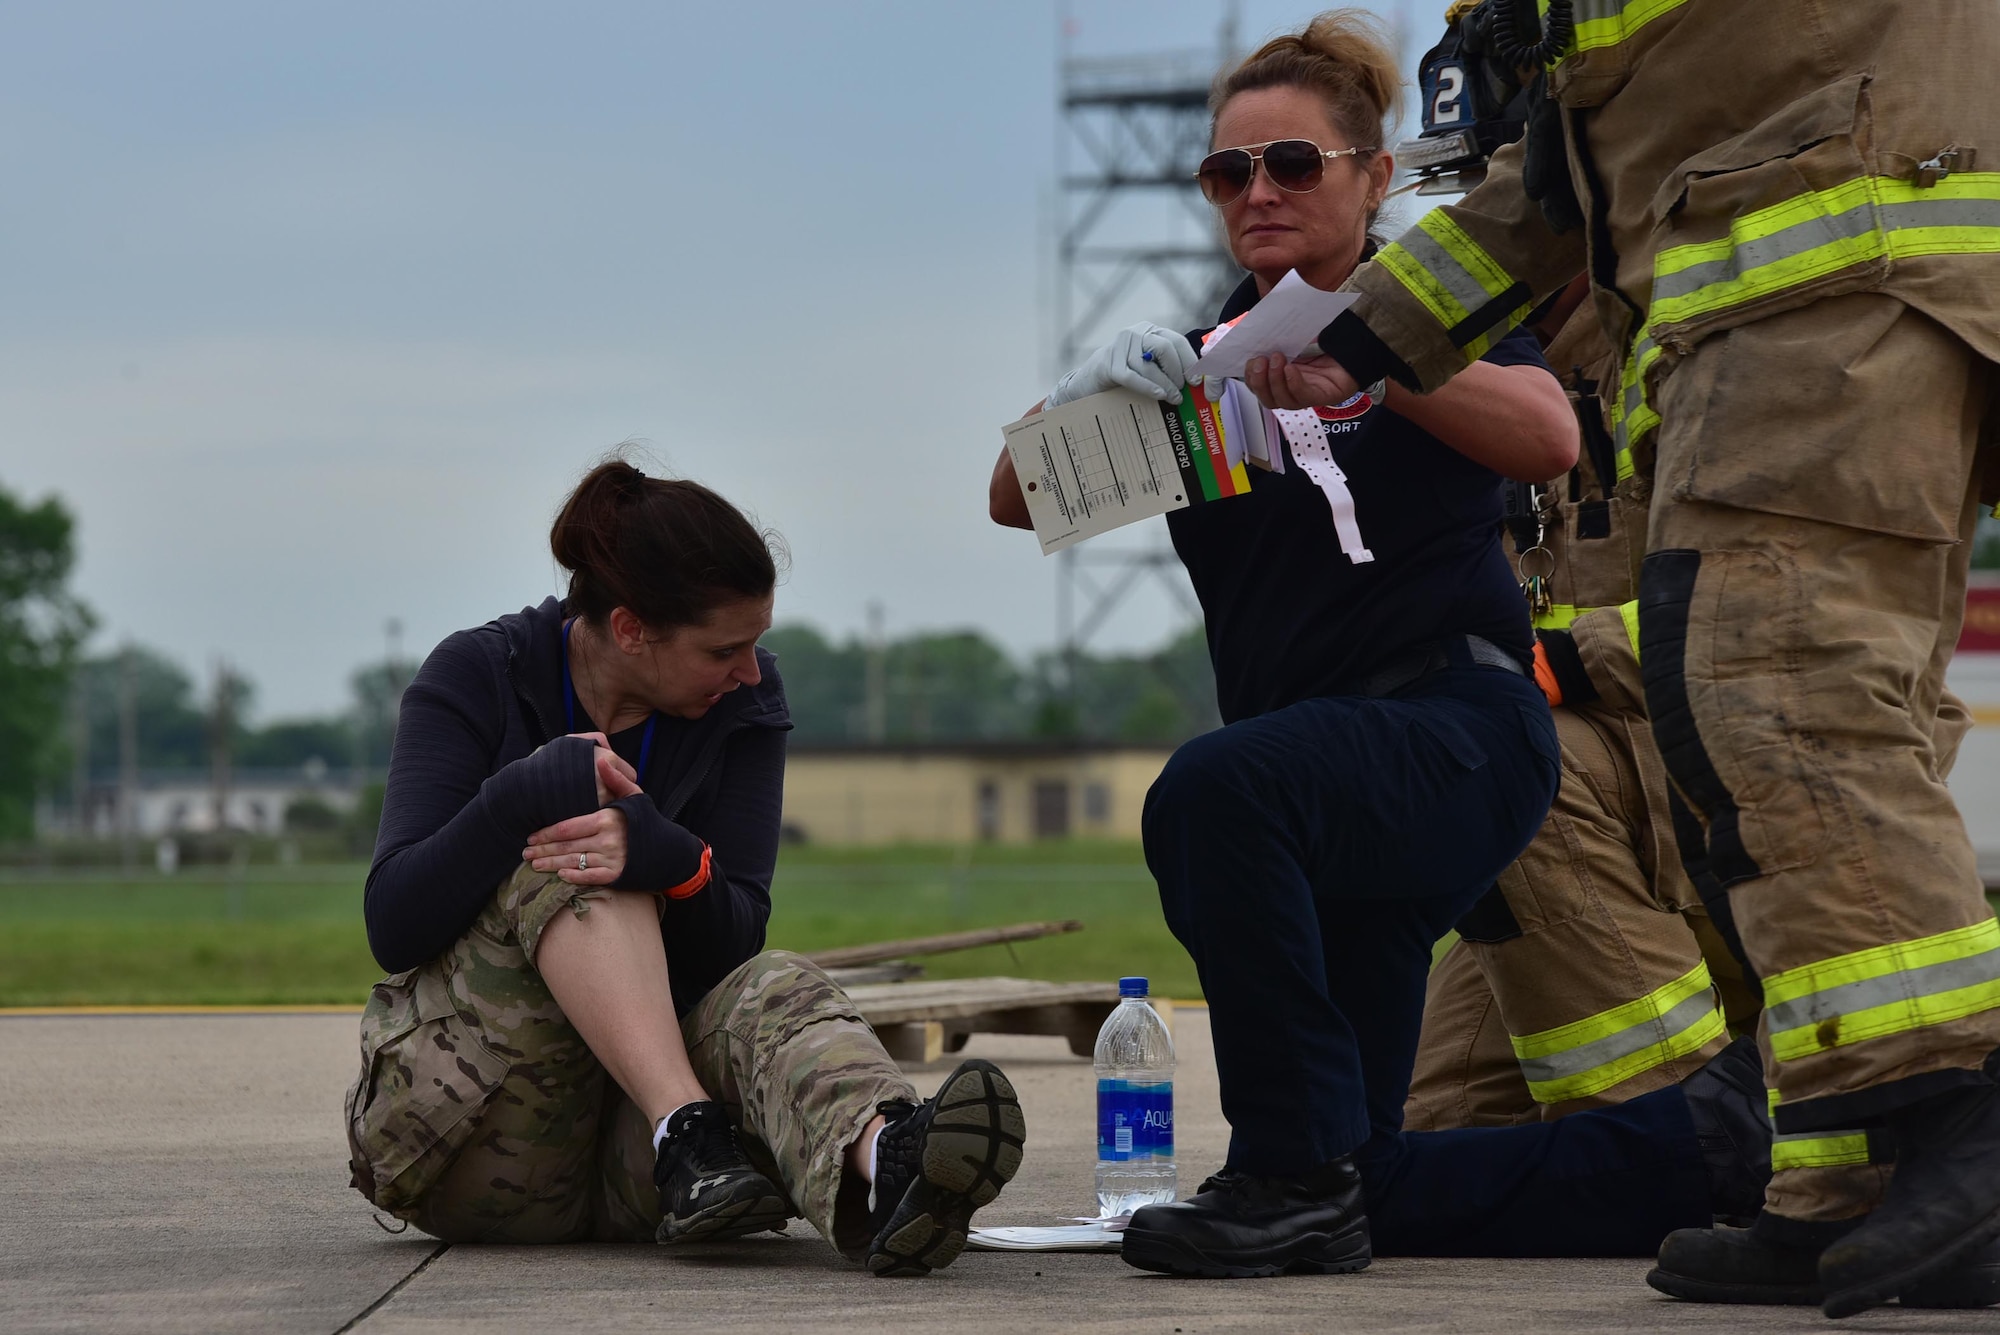 An Airman acts as a crash victim at a mass-casualty exercise.